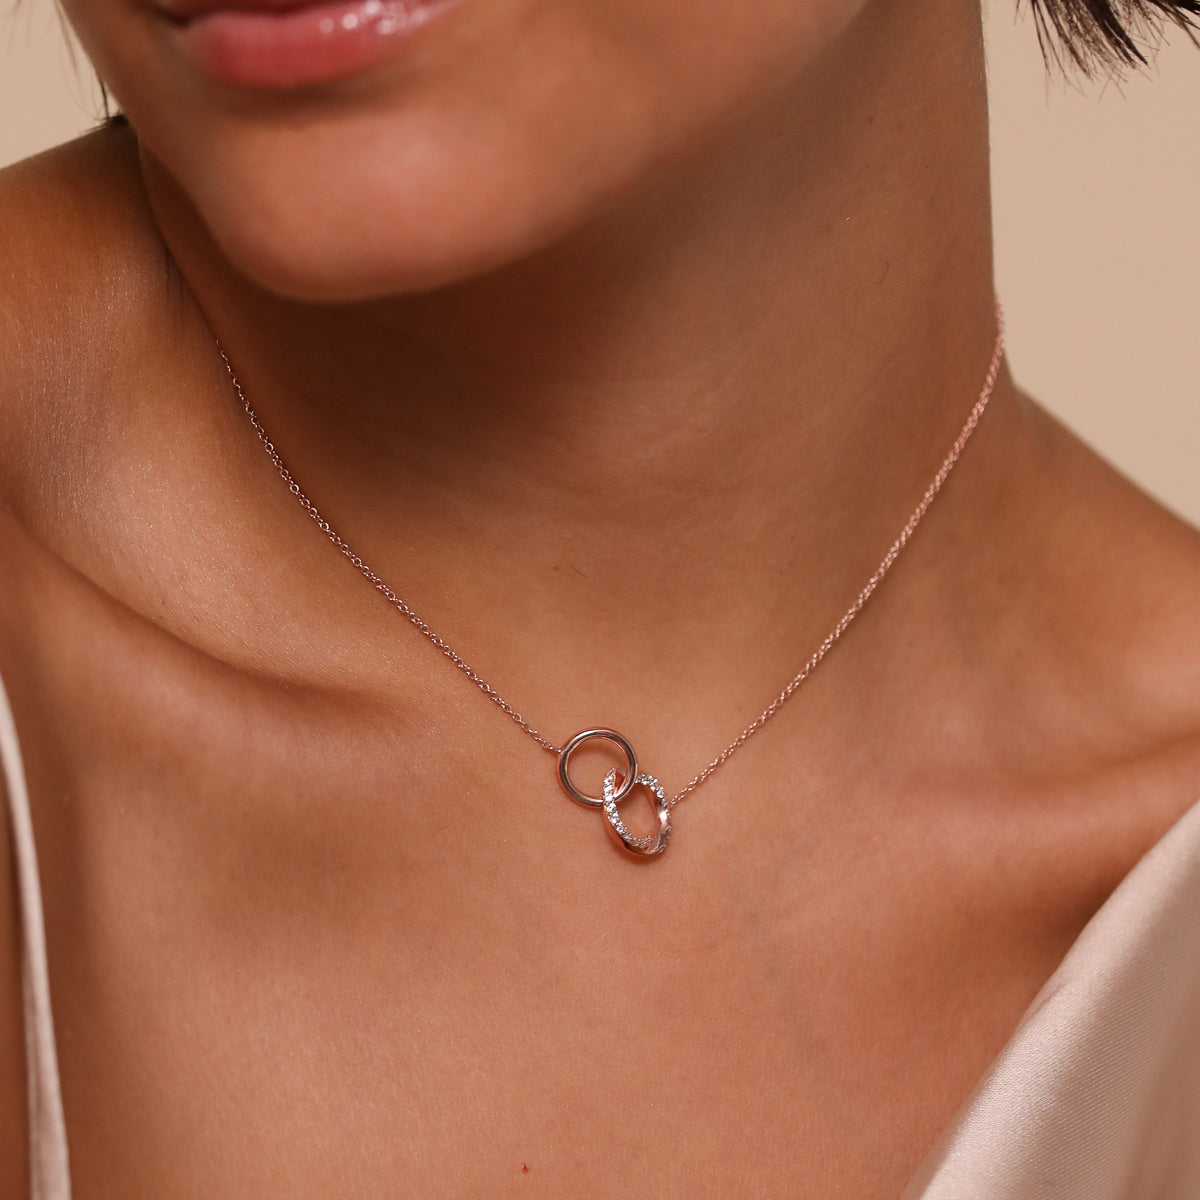 Orbit Crystal Chain Necklace in Rose Gold worn